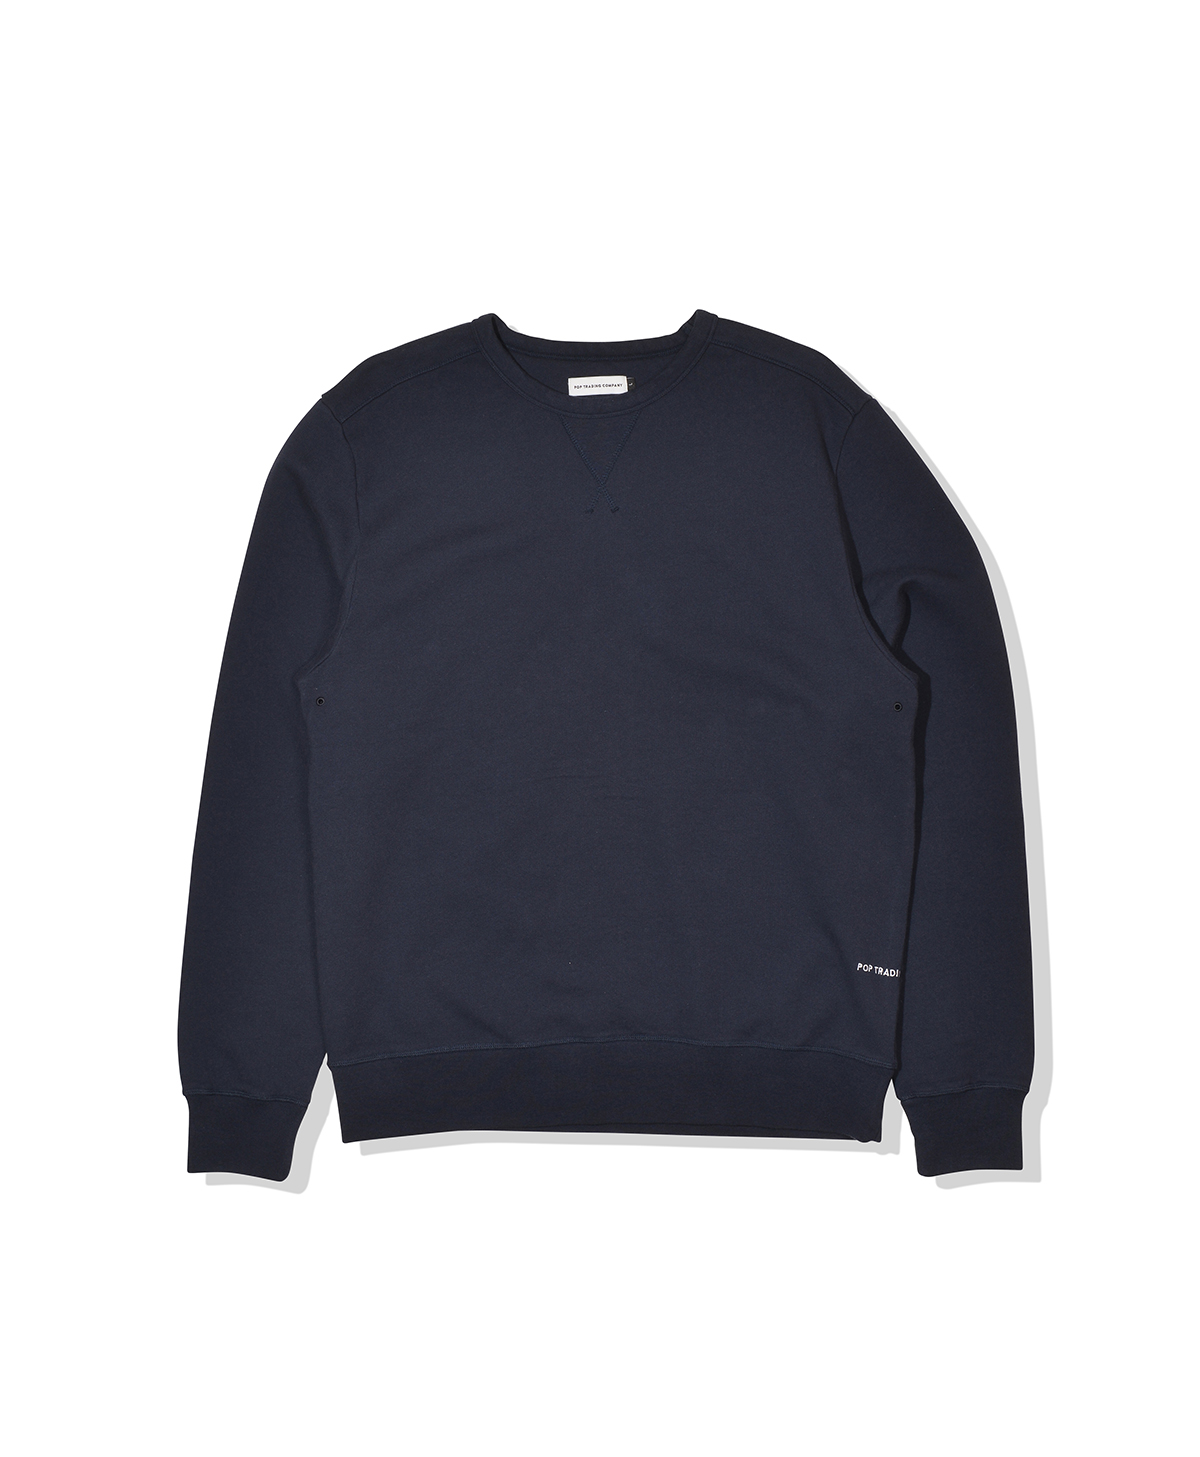 Pop Trading Company AW19 Collection - Pop Trading Company